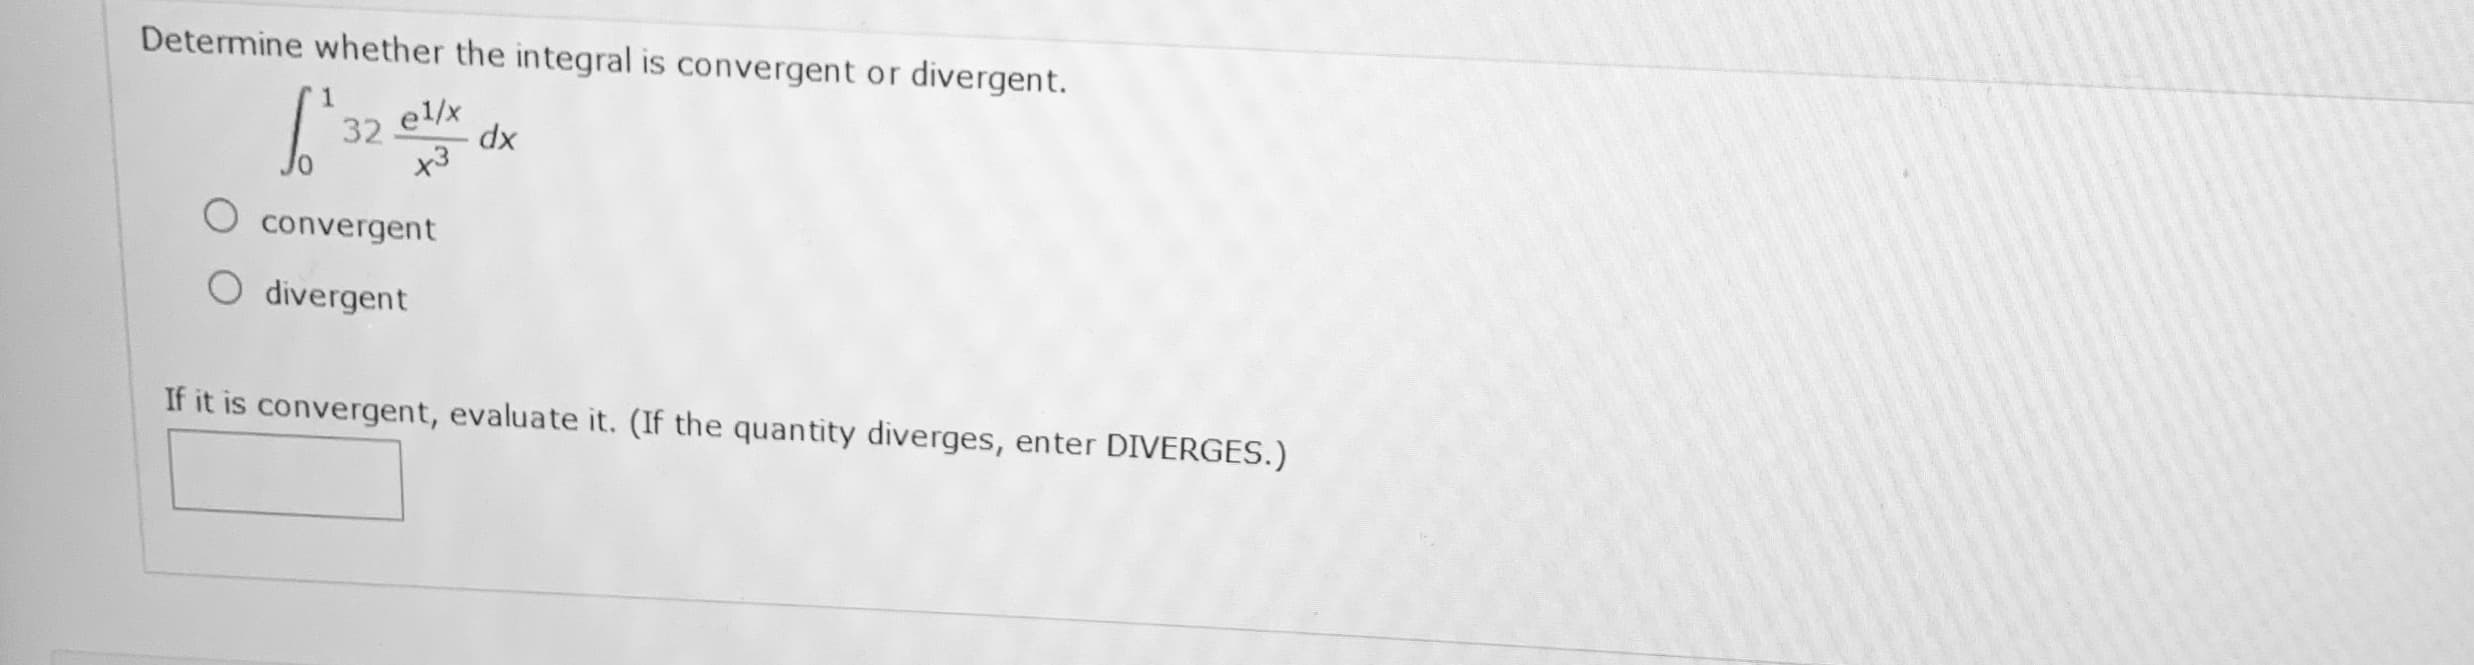 Determine whether the integral is convergent or divergent.
32
el/x
xp
O convergent
O divergent
If it is convergent, evaluate it. (If the quantity diverges, enter DIVERGES.)
